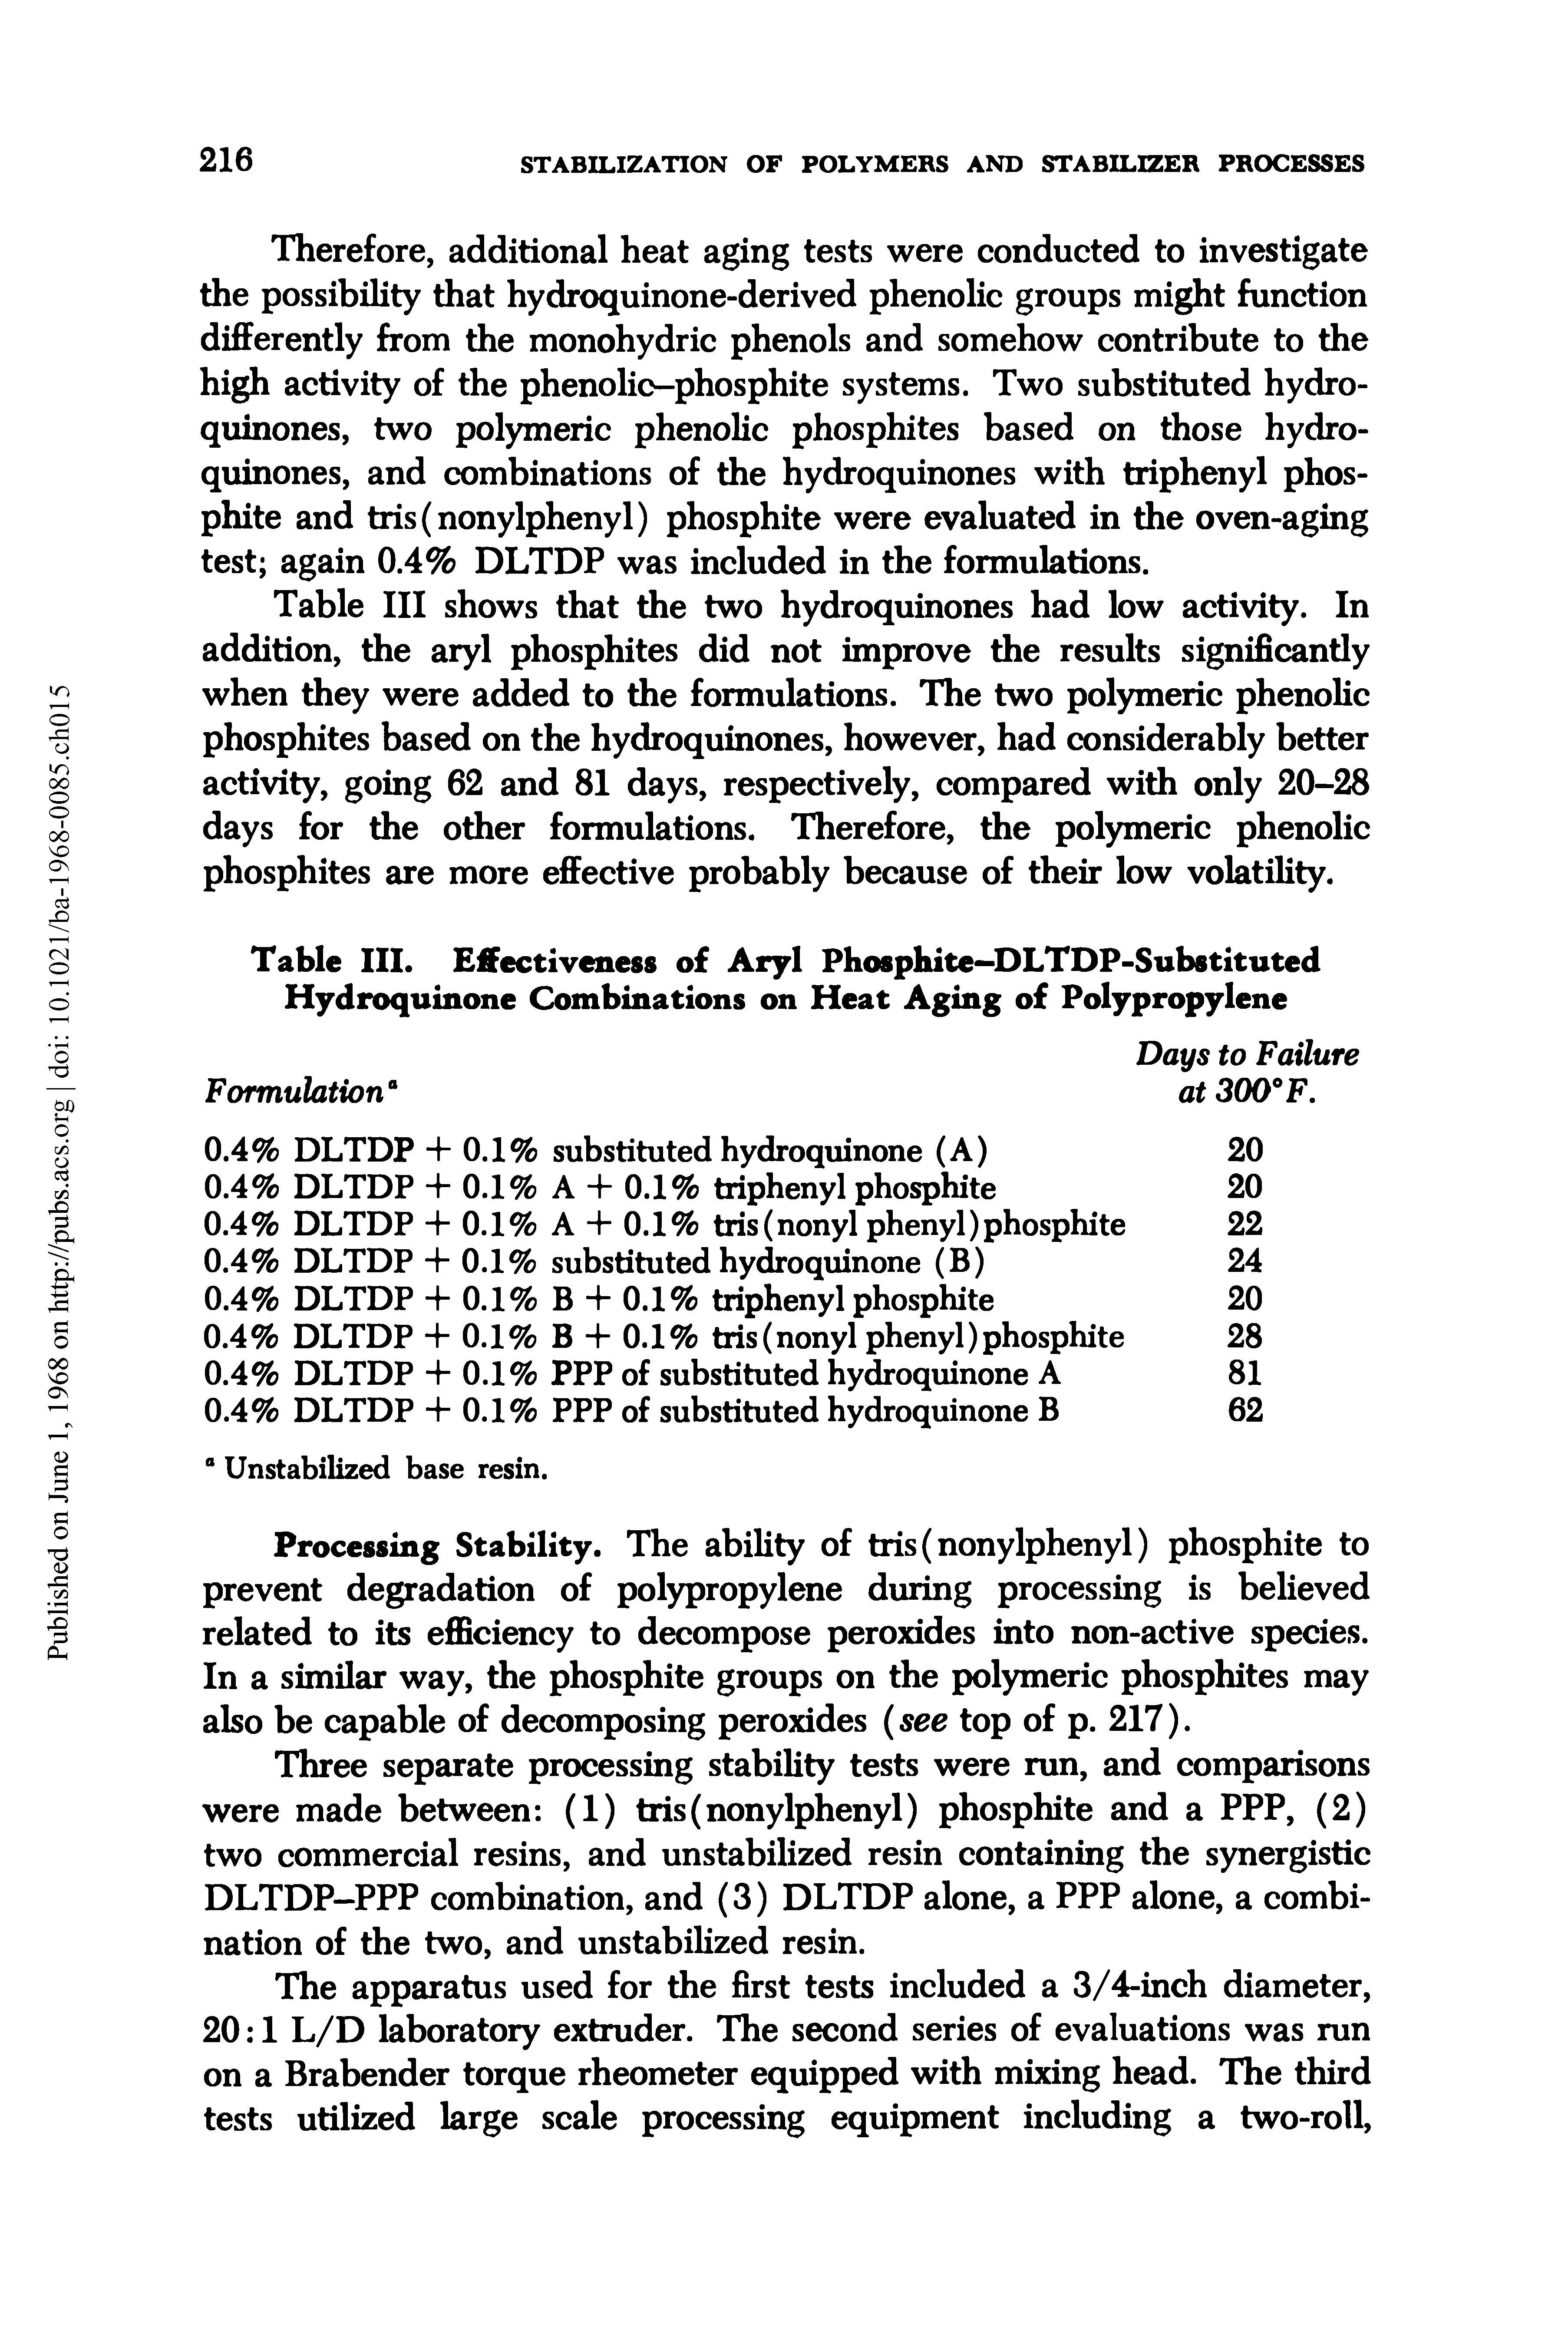 Table III shows that the two hydroquinones had low activity. In addition, the aryl phosphites did not improve the results significantly when they were added to the formulations. The two polymeric phenolic phosphites based on the hydroquinones, however, had considerably better activity, going 62 and 81 days, respectively, compared with only 20-28 days for the other formulations. Therefore, the polymeric phenolic phosphites are more effective probably because of their low volatility.